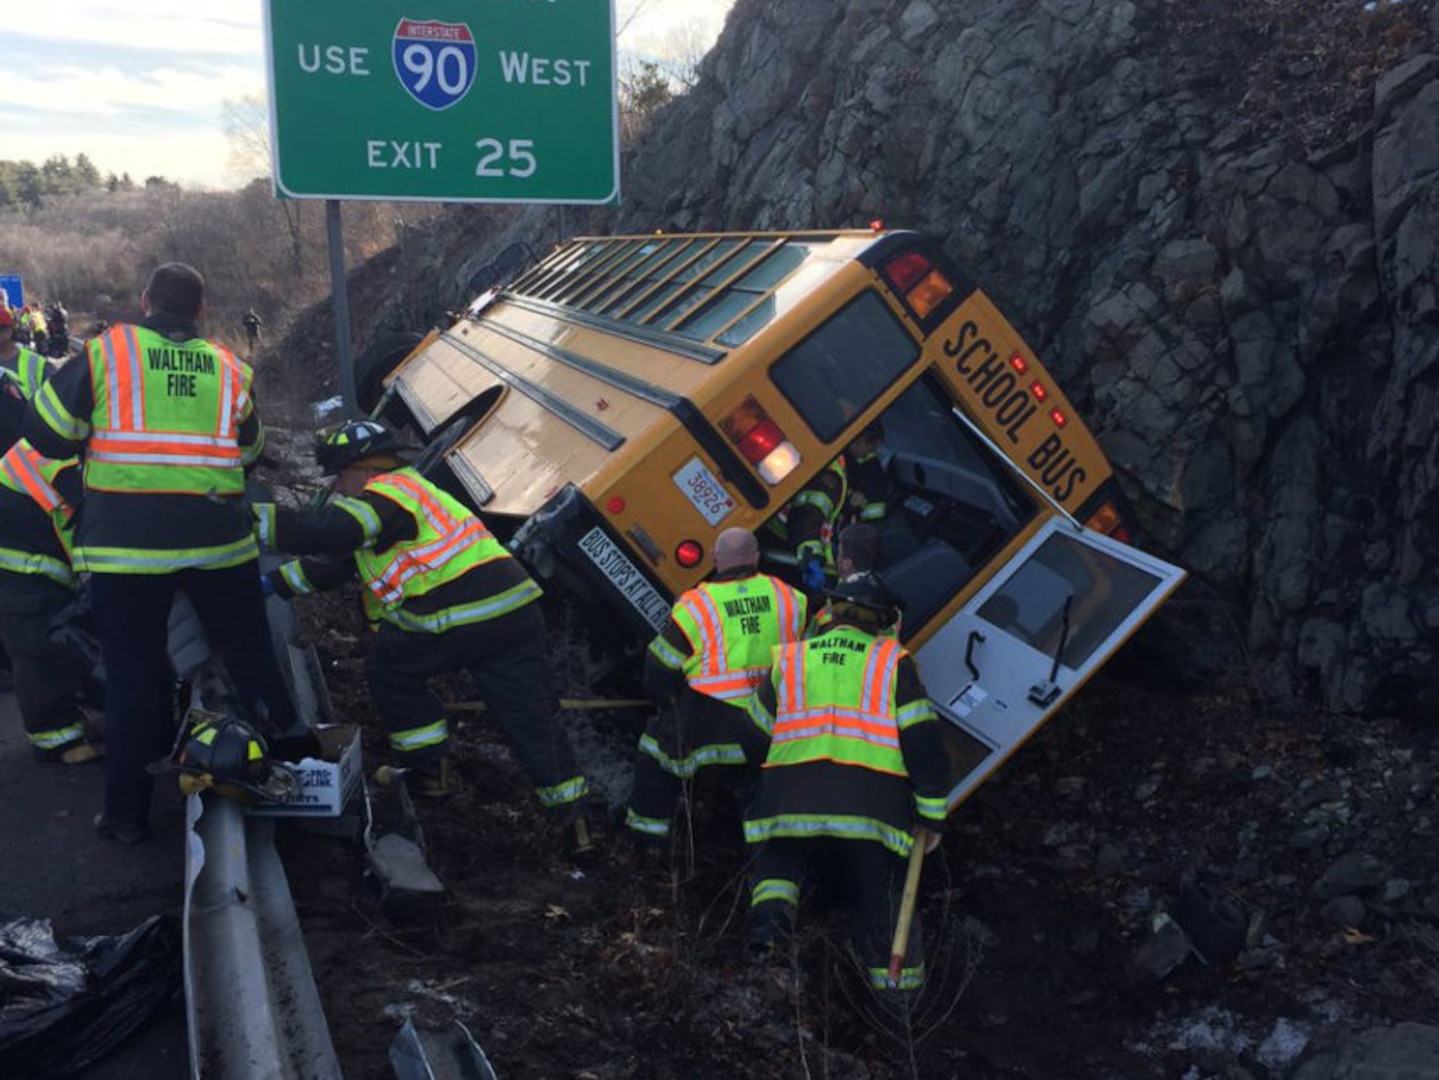 Massachusetts National Guard Capt. David Wilson has been cited by a state trooper for his assistance evacuating this school bus after it crashed last week on Interstate 95.